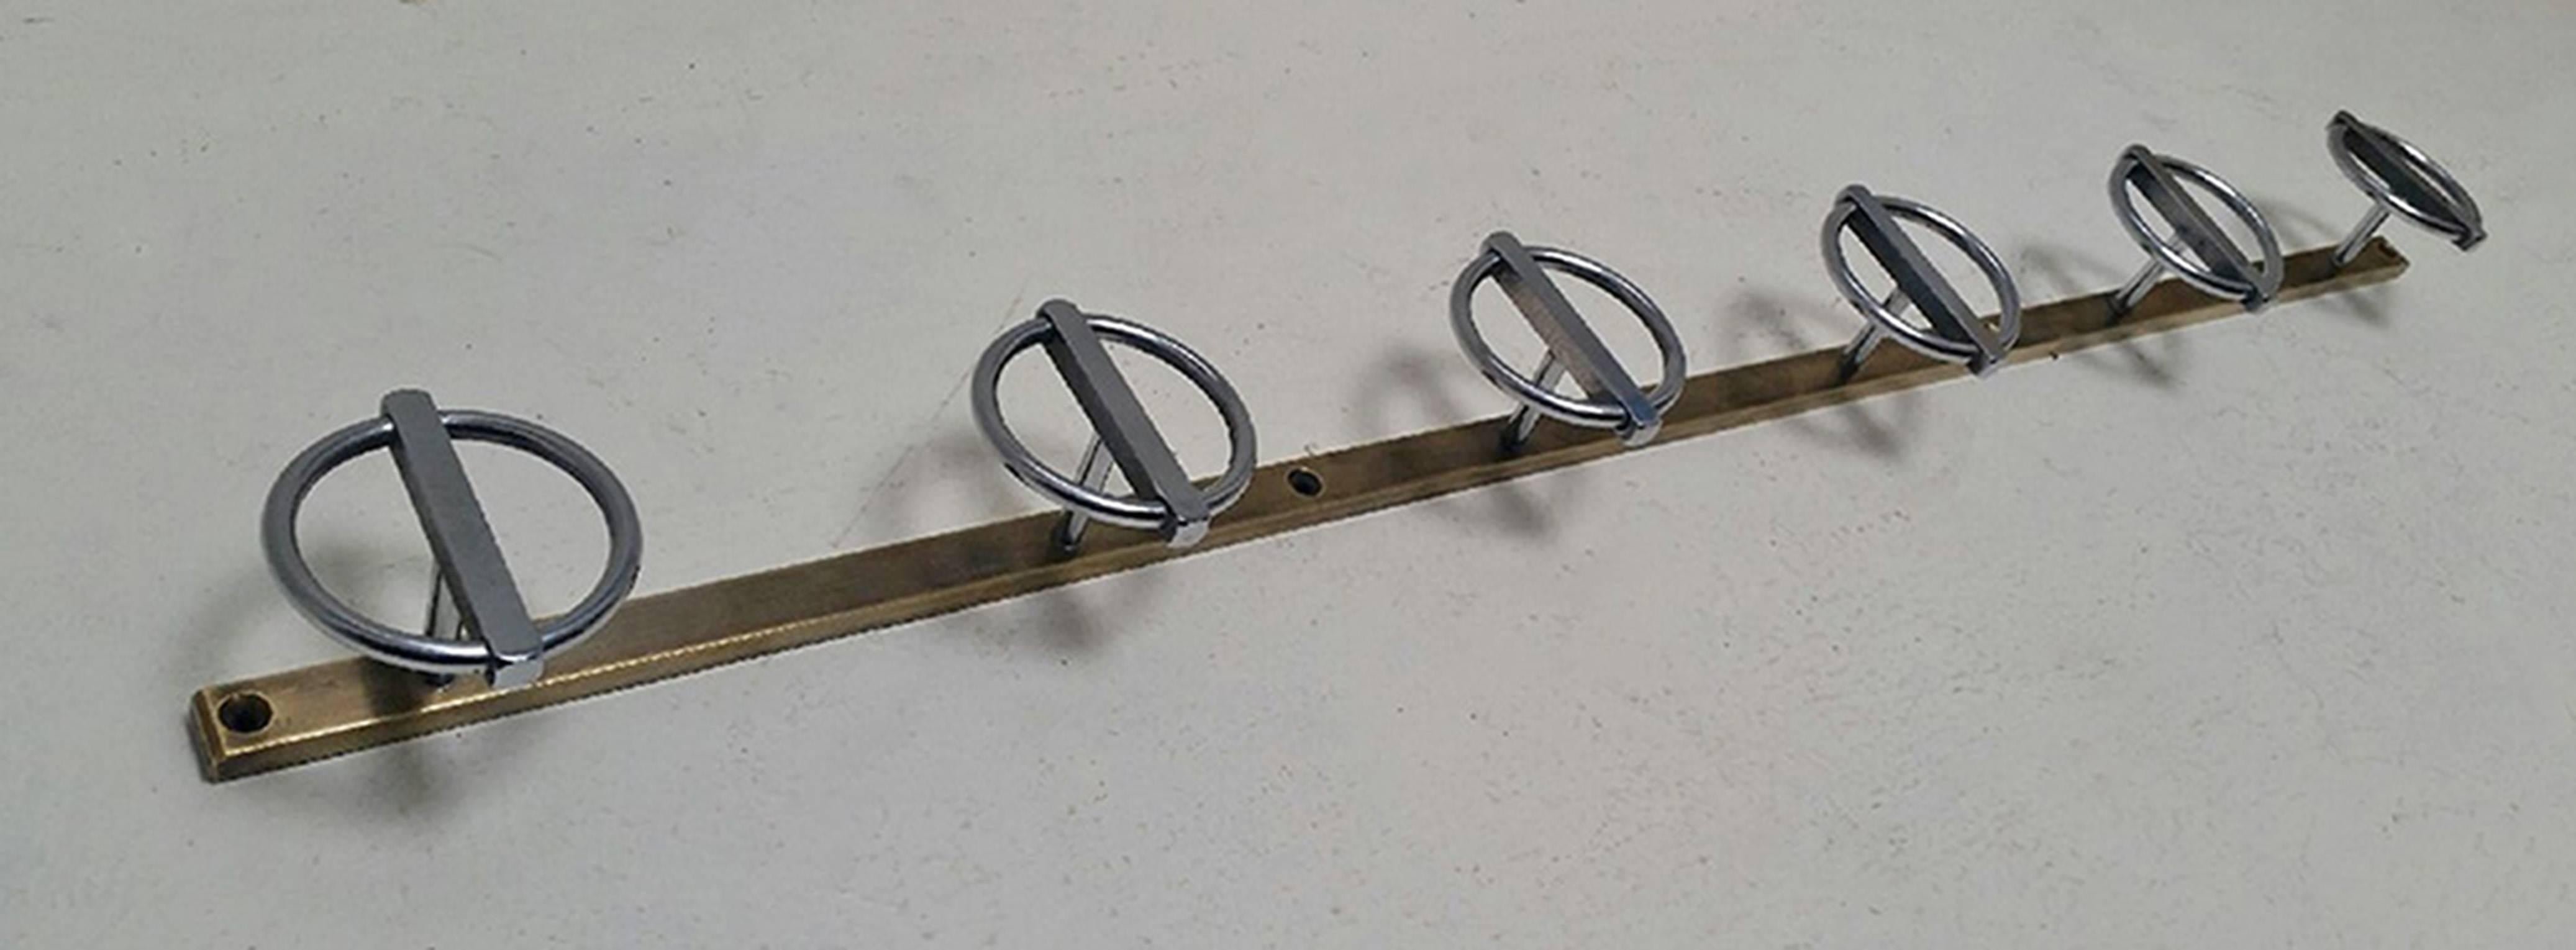 Mid-20th Century Bronze and Nickel French Modernist Wall Mount Coat Rack